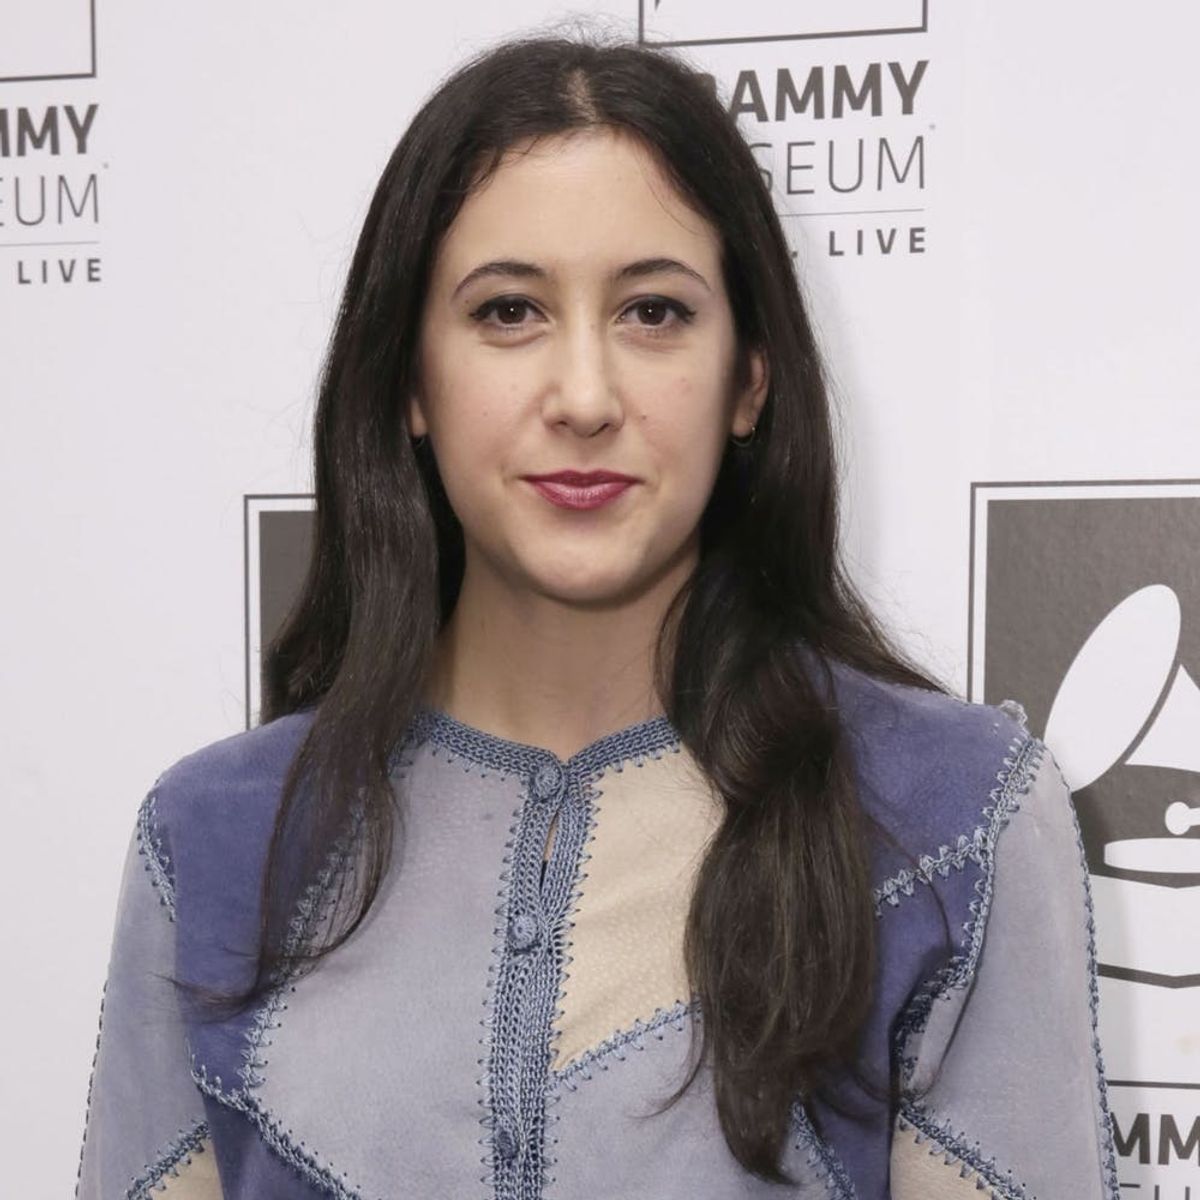 Vanessa Carlton Is Supporting a Petition Calling for Grammys Boss Neil Portnow to Step Down